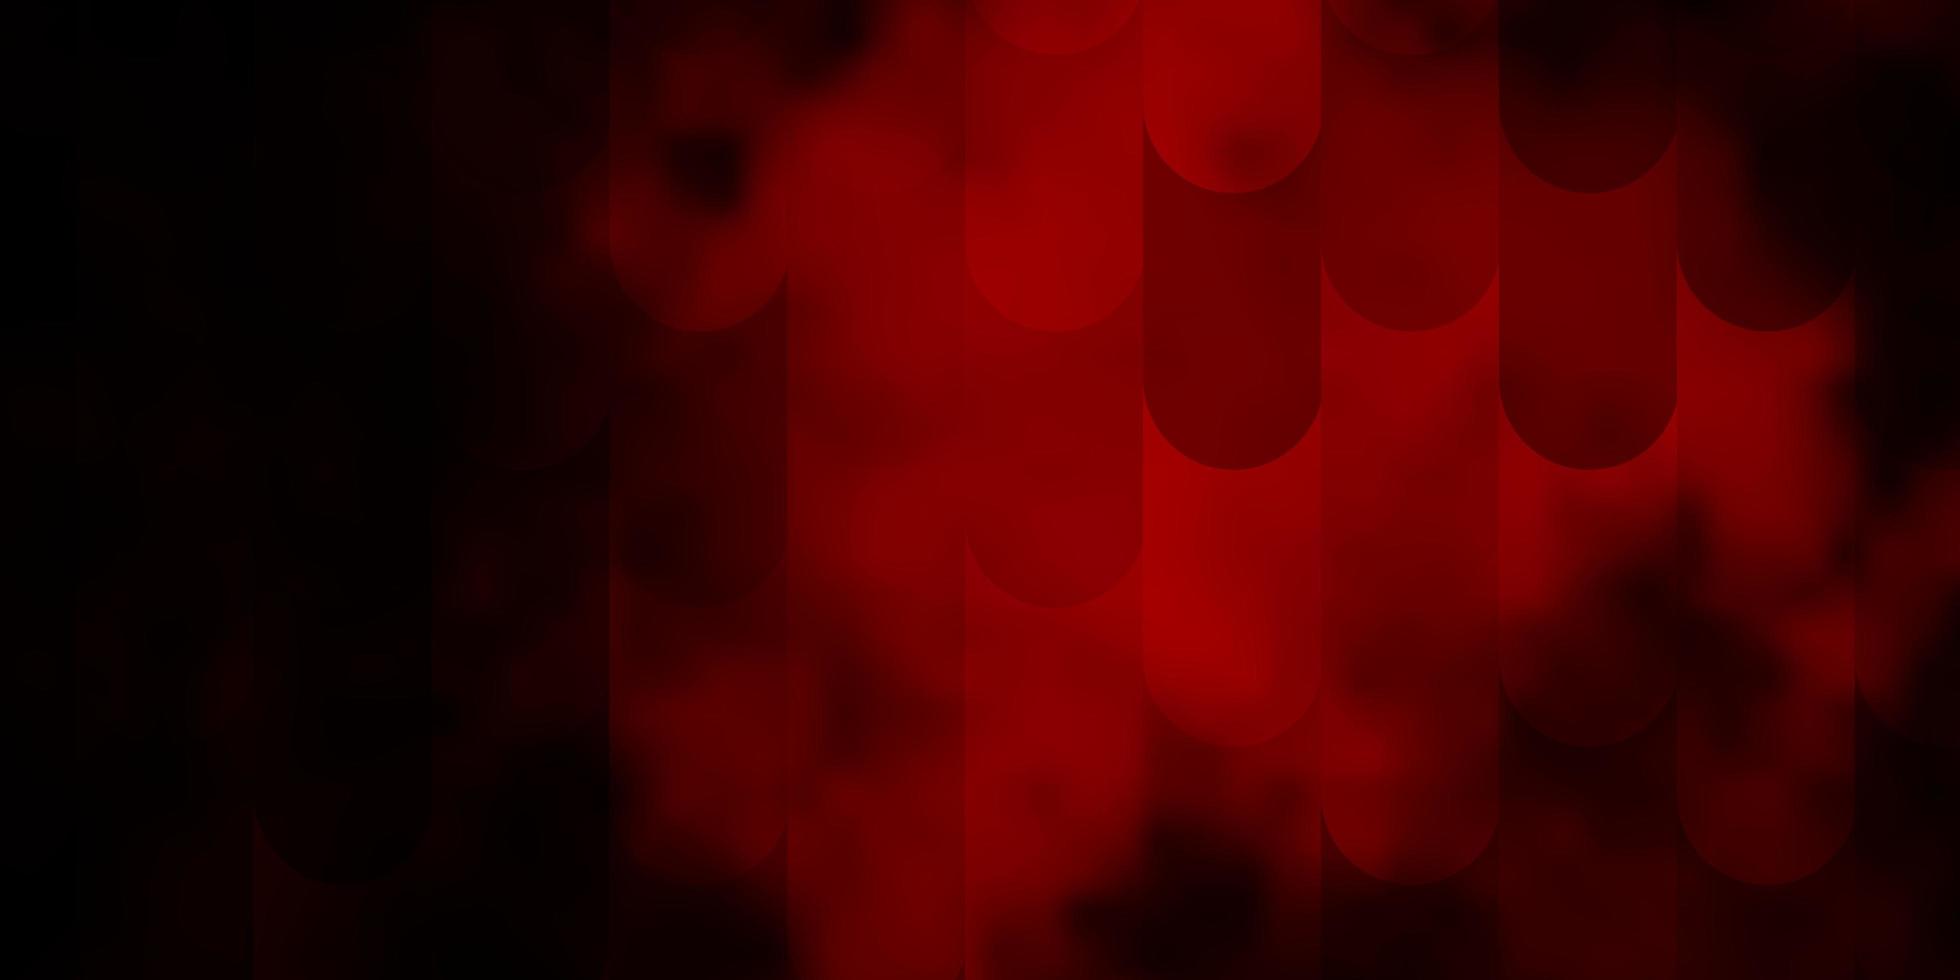 Dark Red vector background with lines. Repeated lines on abstract background with gradient. Pattern for booklets, leaflets.